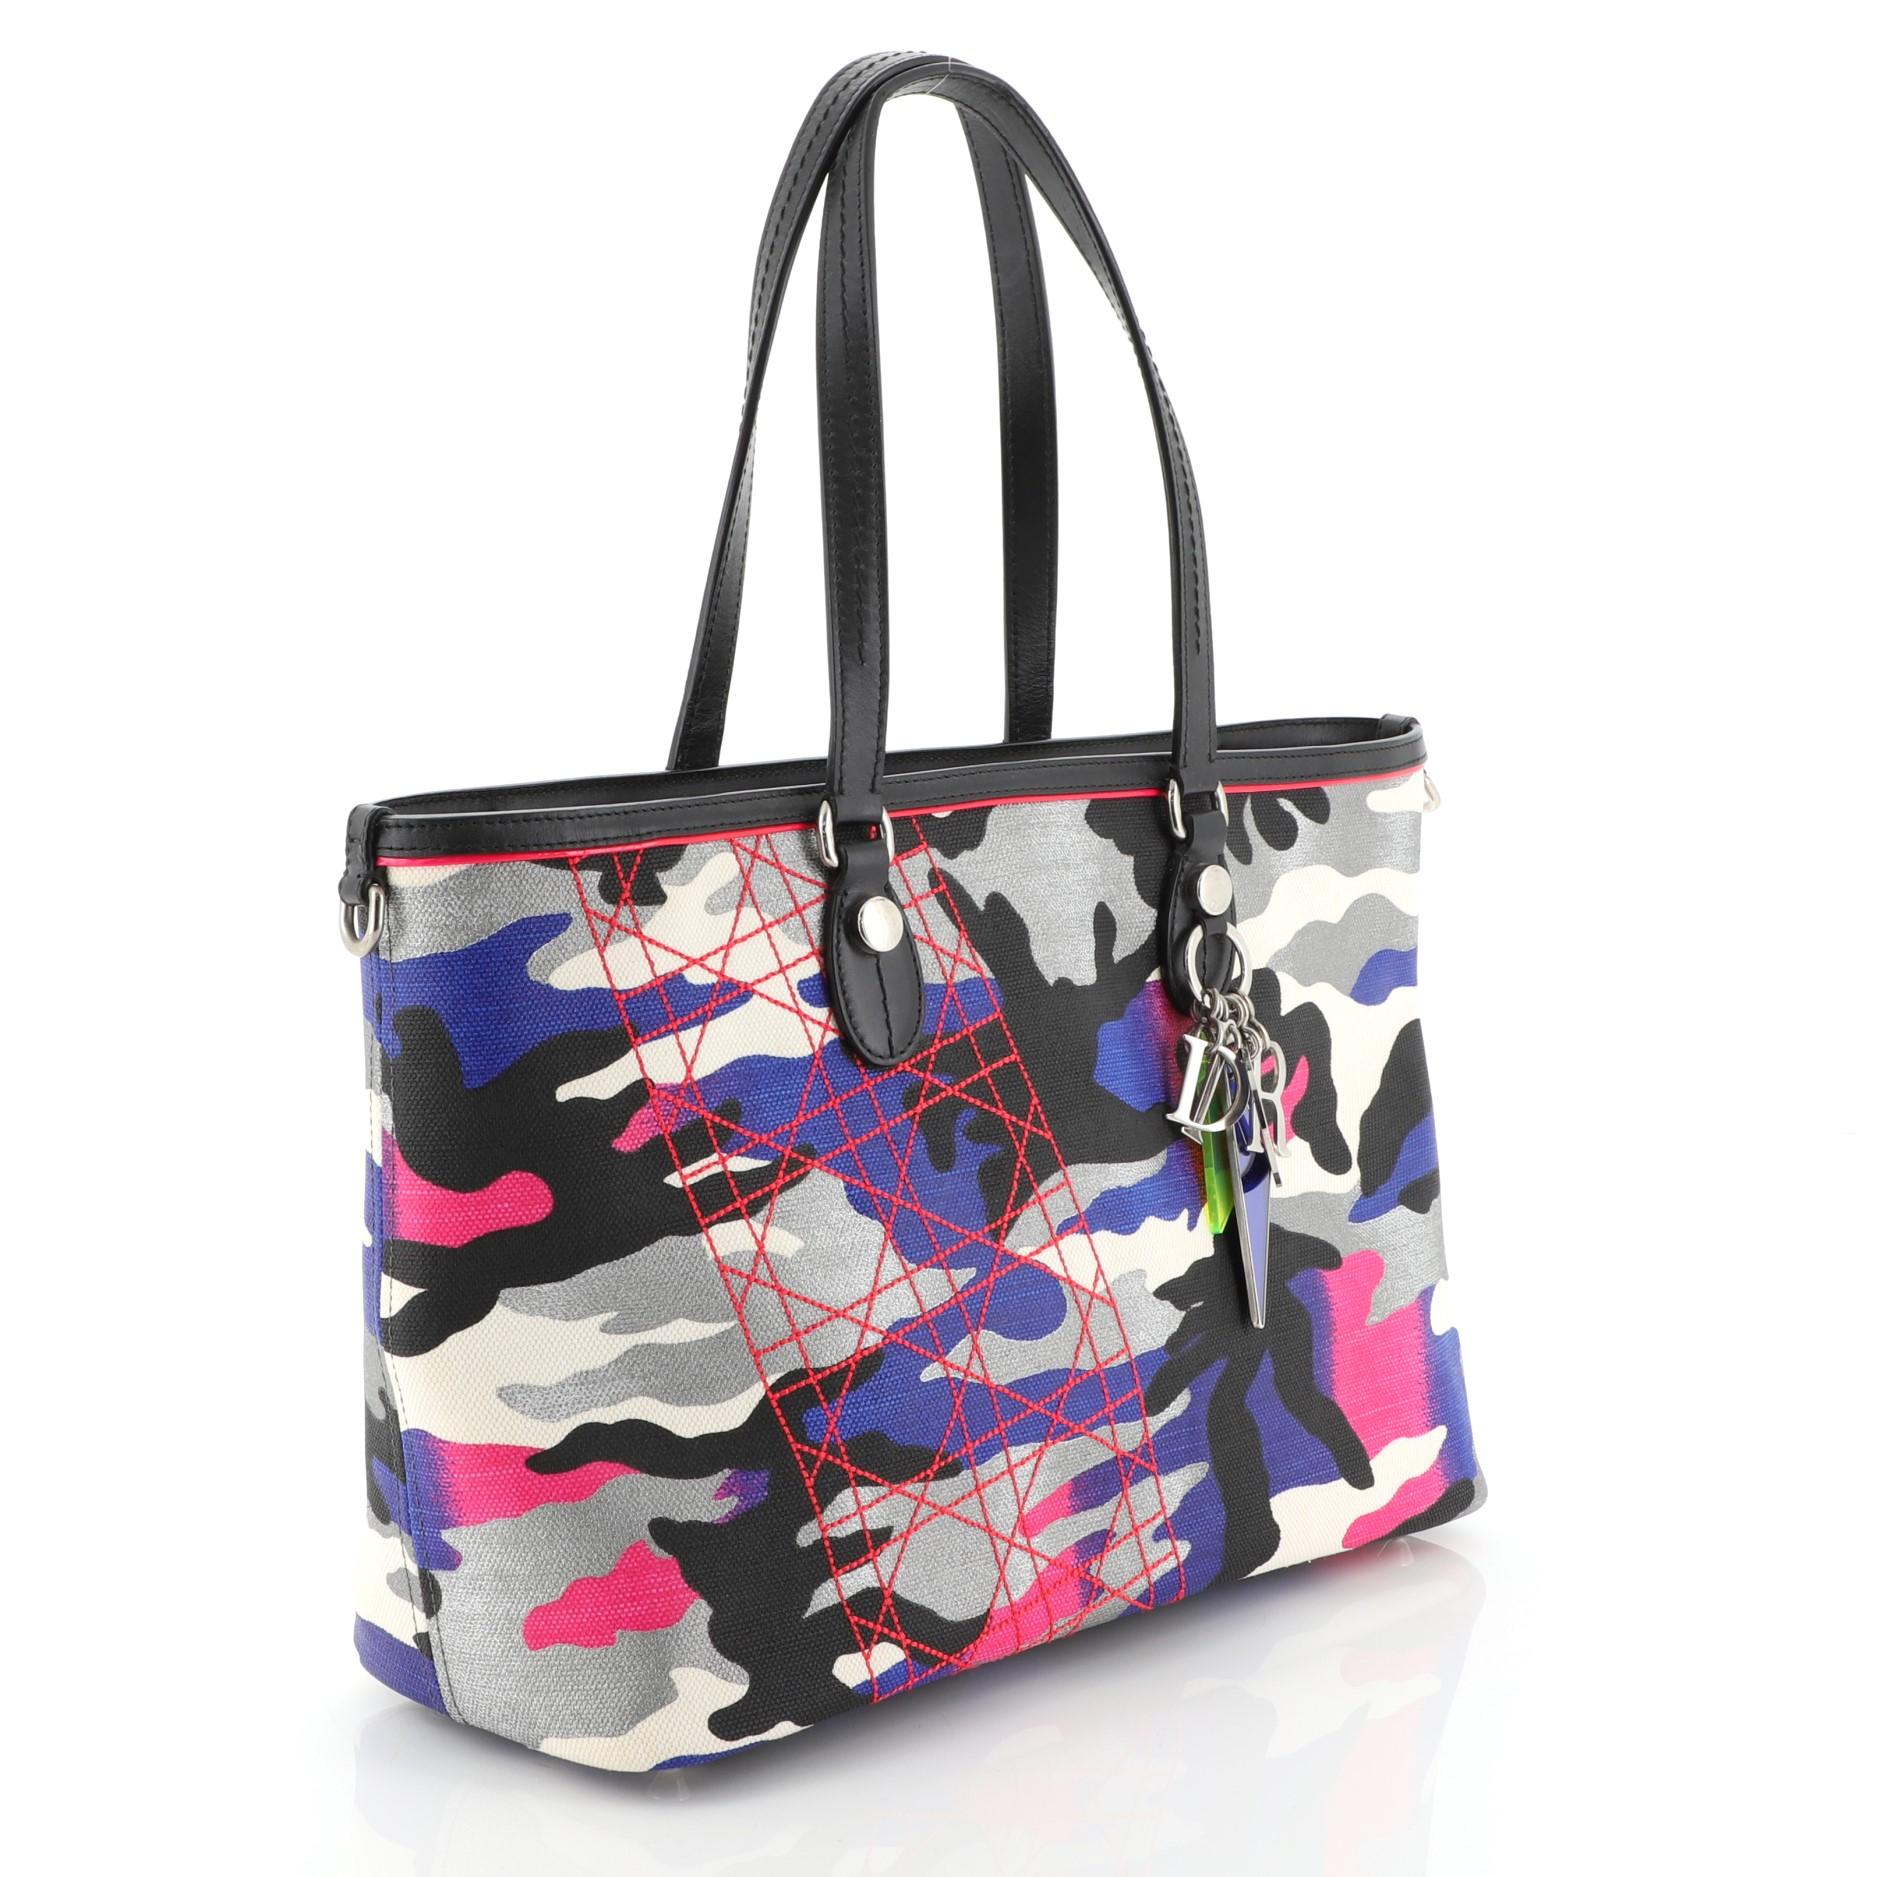 This Christian Dior Open Tote Limited Edition Anselm Reyle Camouflage Canvas Medium, crafted in blue and pink multicolor camouflage canvas, features dual flat leather handles, leather trim, and silver-tone hardware. Its zip closure opens to a black